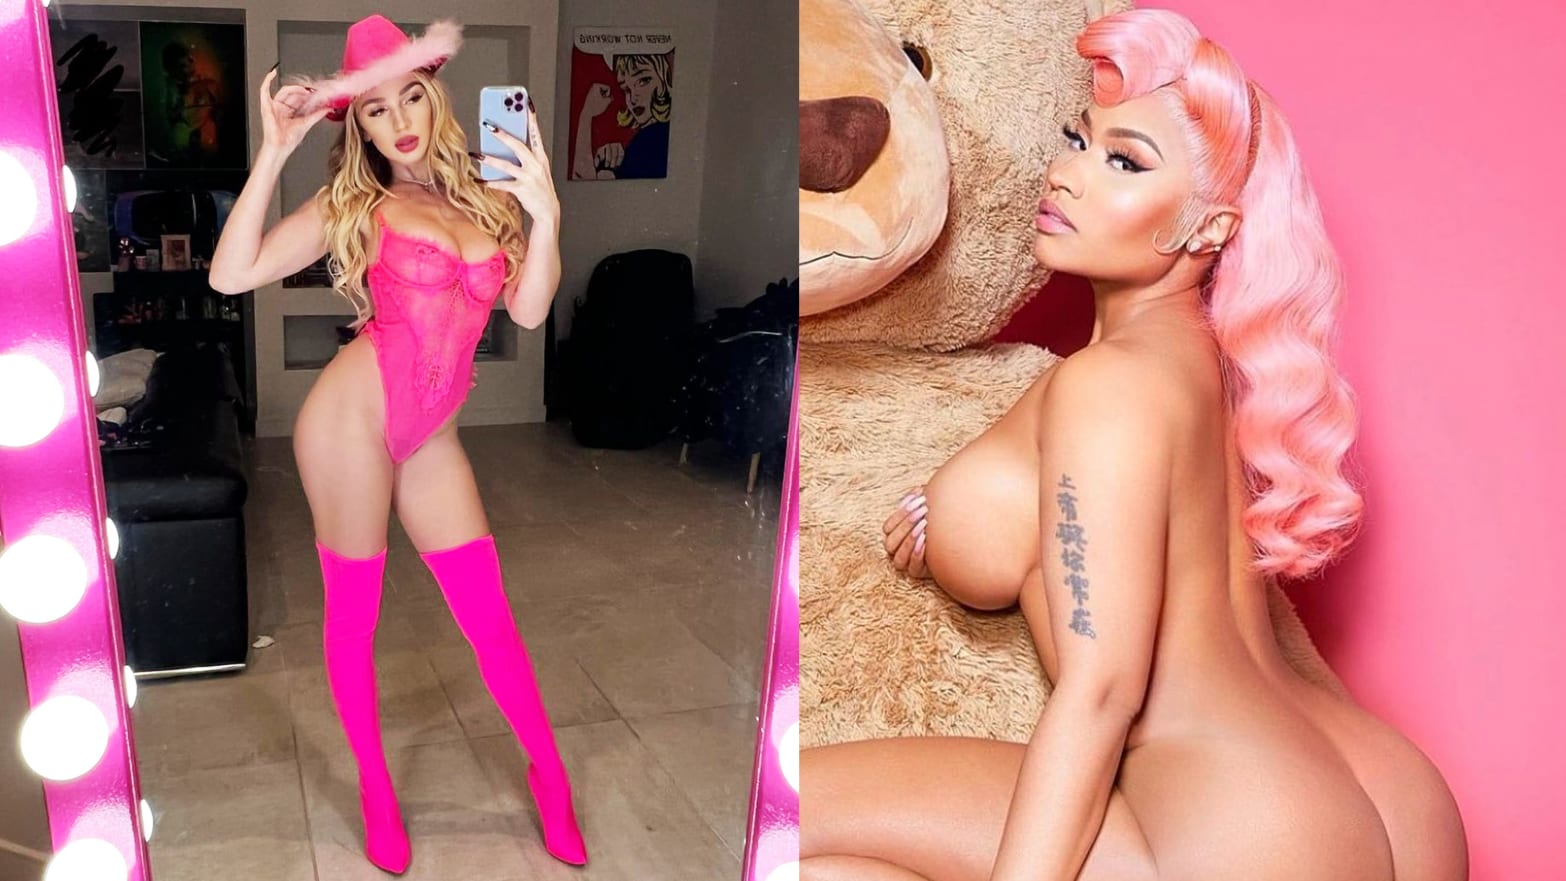 Pourn Move Xhant - Porn Star Kendra Sunderland Asks Why Nicki Minaj Can Get Naked on Instagram  and Porn Stars Can't